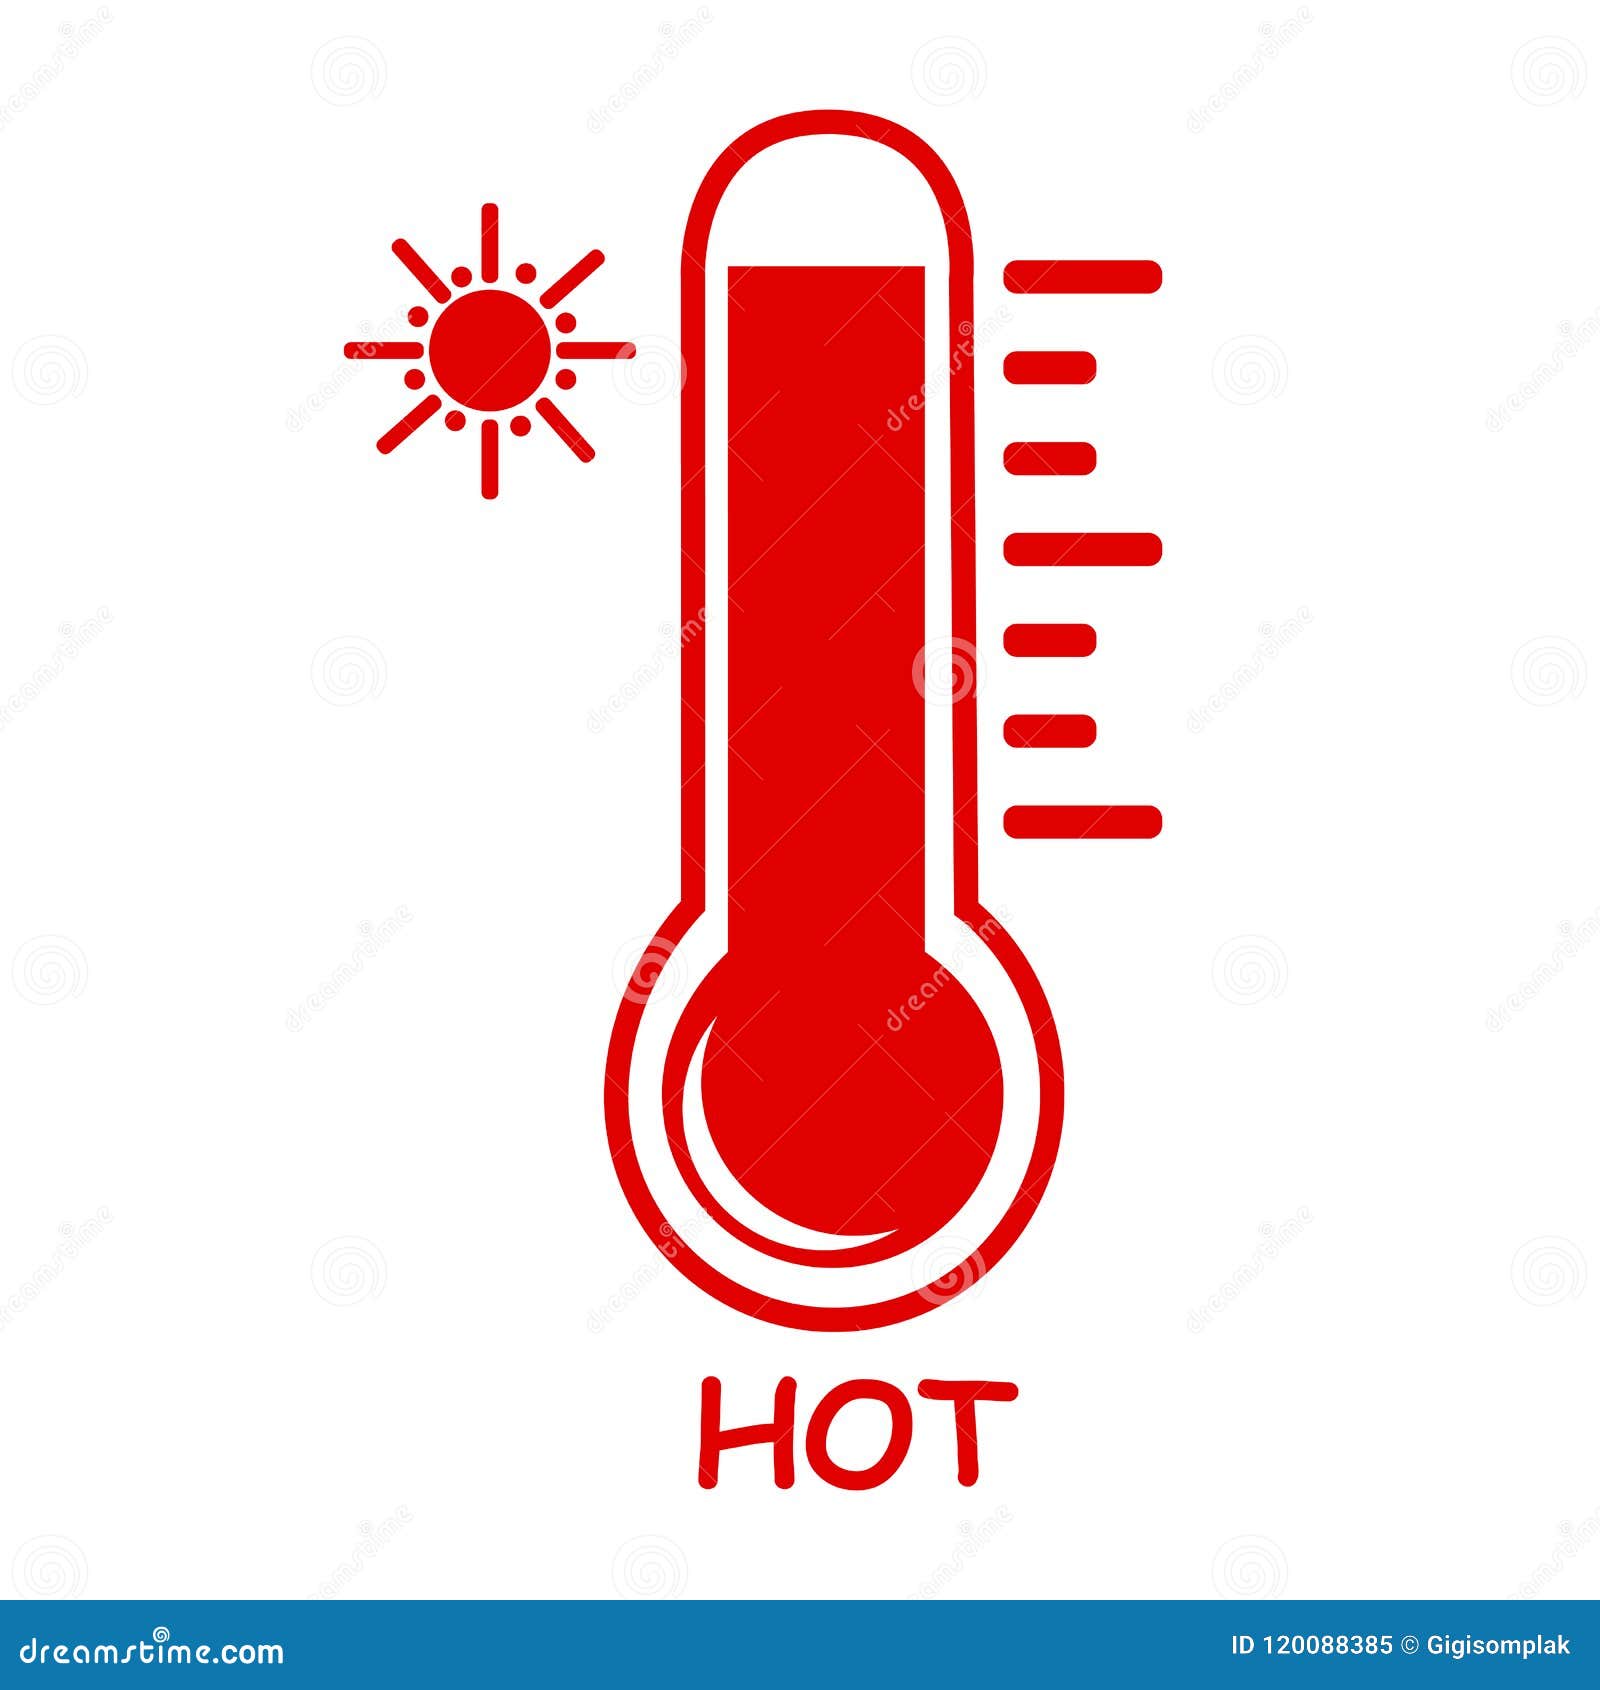 https://thumbs.dreamstime.com/z/simple-icon-liquid-thermometer-hot-vector-simple-icon-liquid-thermometer-hot-120088385.jpg